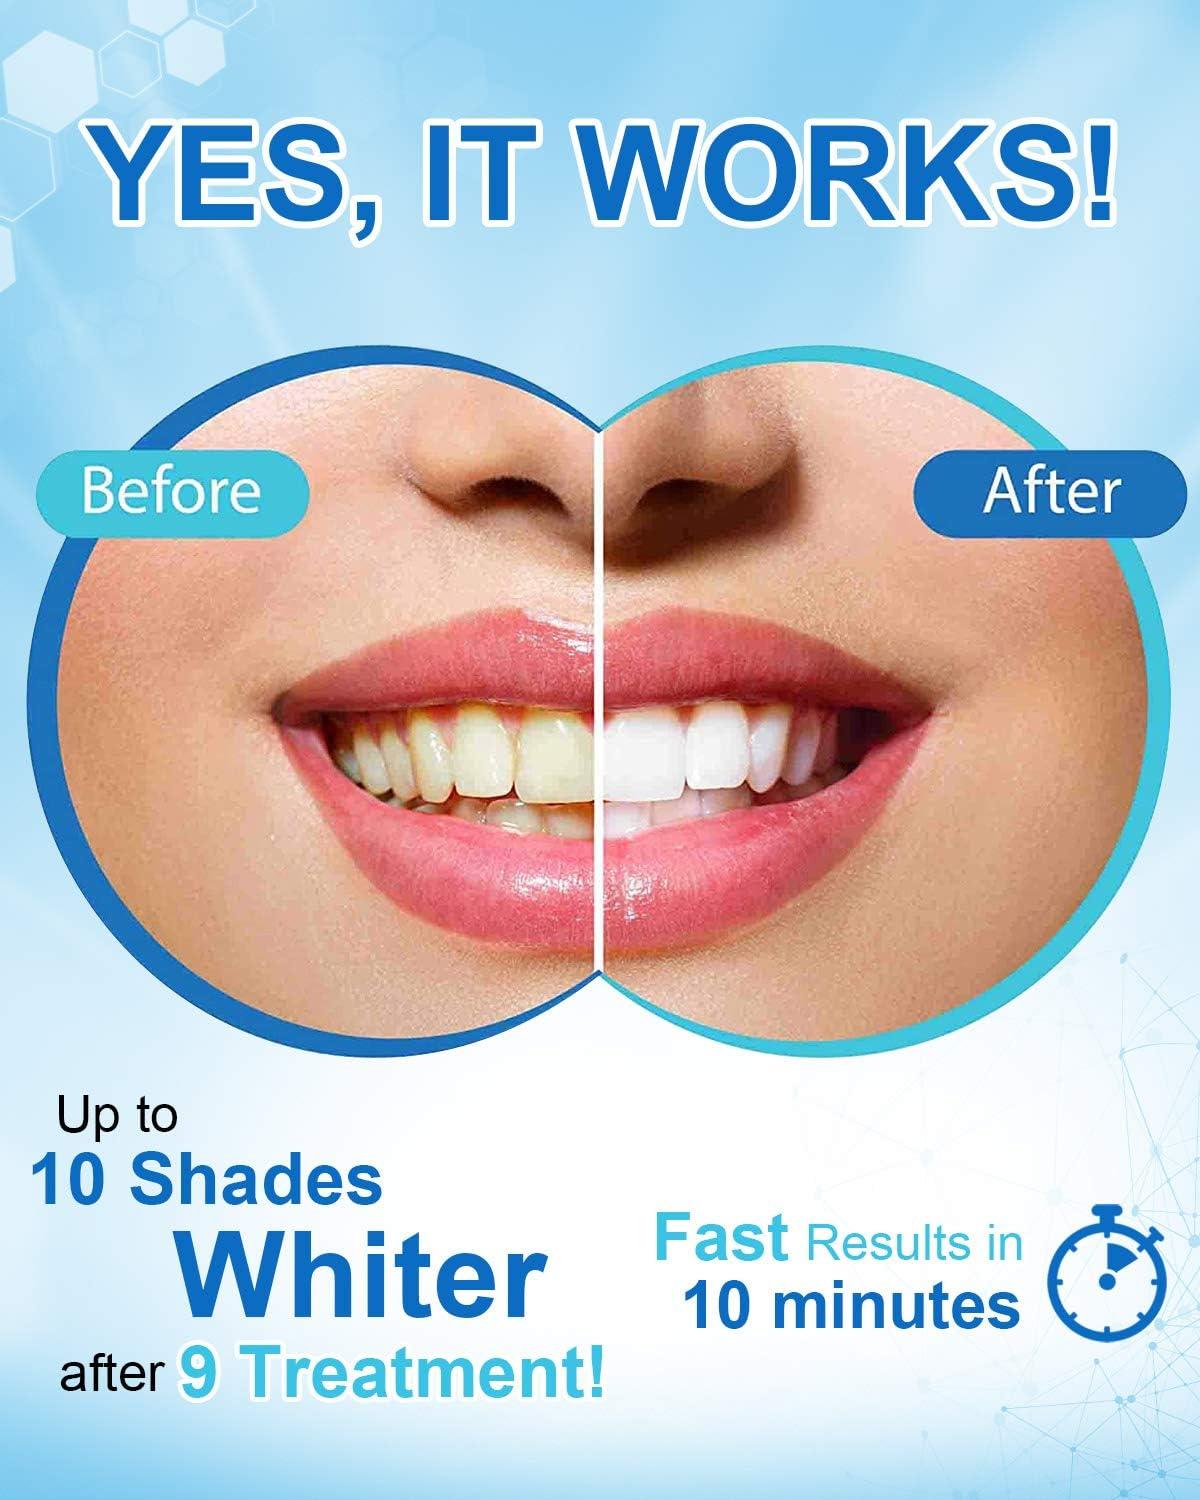 My teeth look PERFECTLY white!' This $19.99 tooth whitening pen